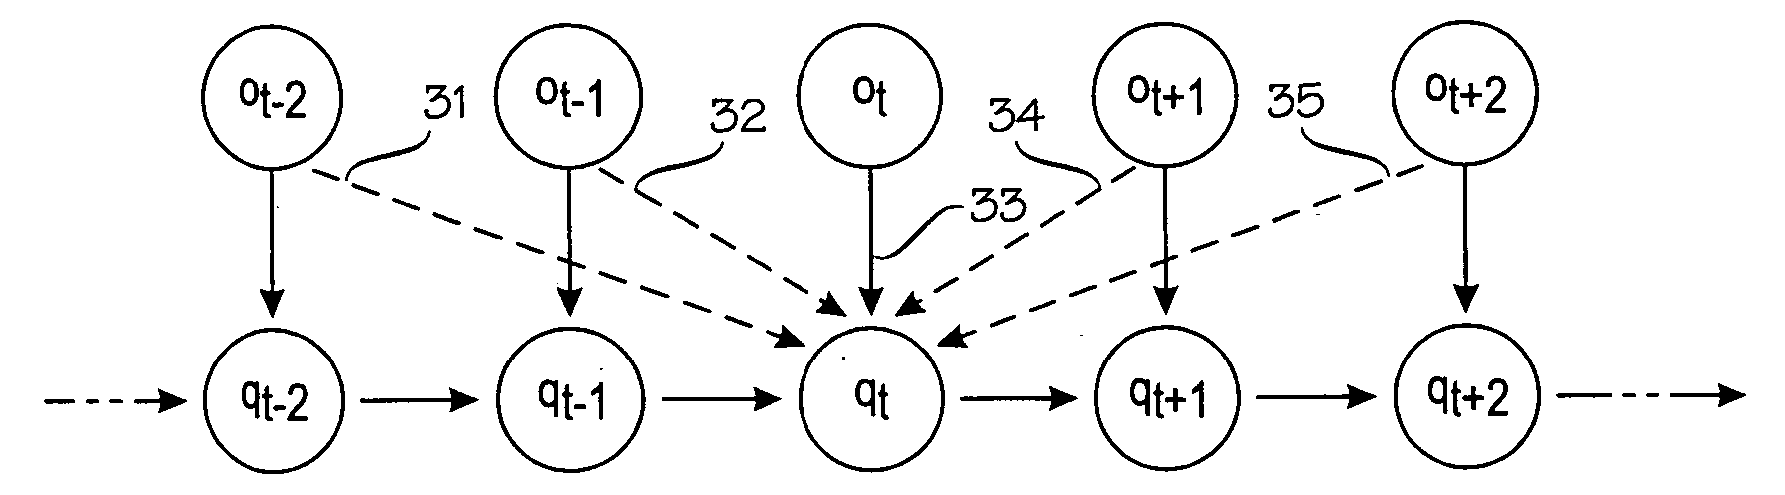 Sequence-based positioning technique